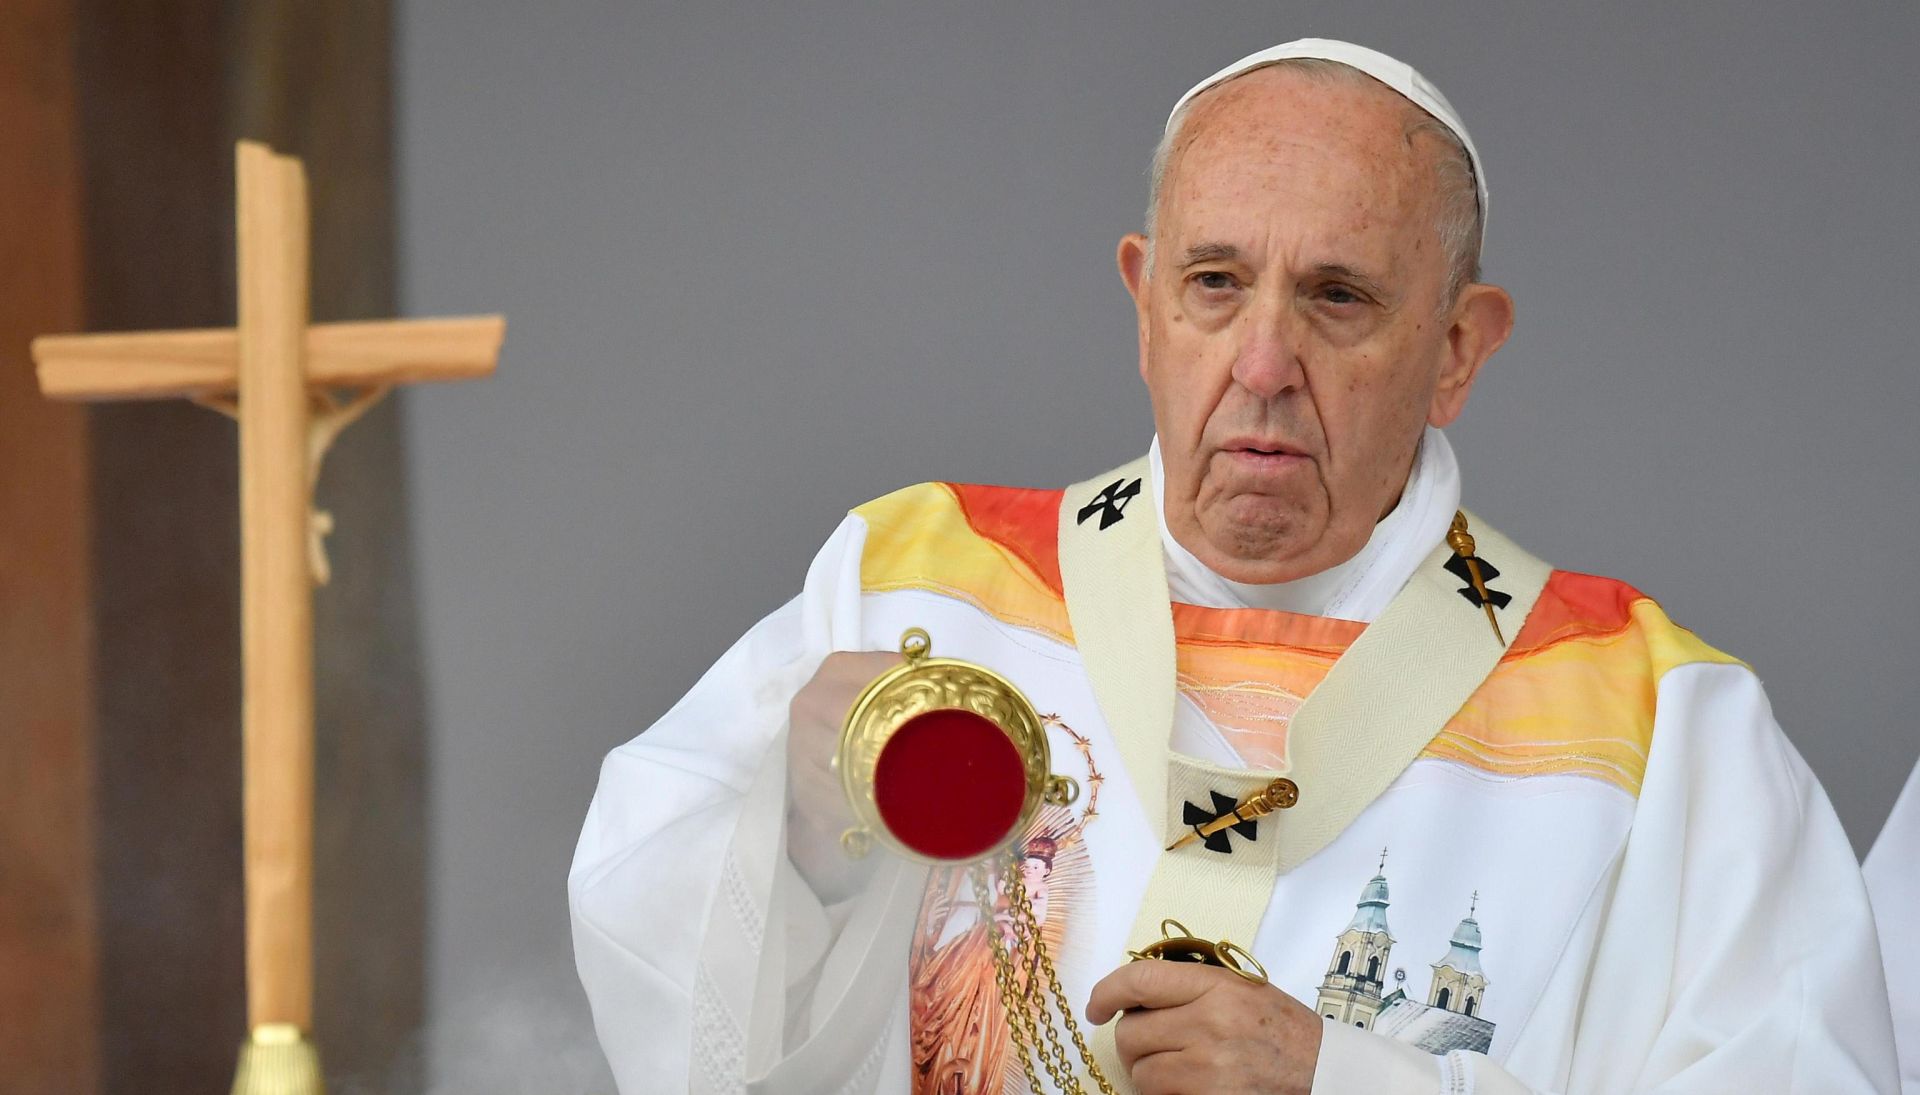 epa07617072 Pope Francis leads the Holy Mass at the Marian Sumuleu-Ciuc Shrine in Miercurea-Ciuc, Romania, 01 June 2019. The pontiff visit takes place 20 years after Pope St. John Paul II's historic visit to Romania, having the motto 'Let's Walk Together'.  EPA/ETTORE FERRARI